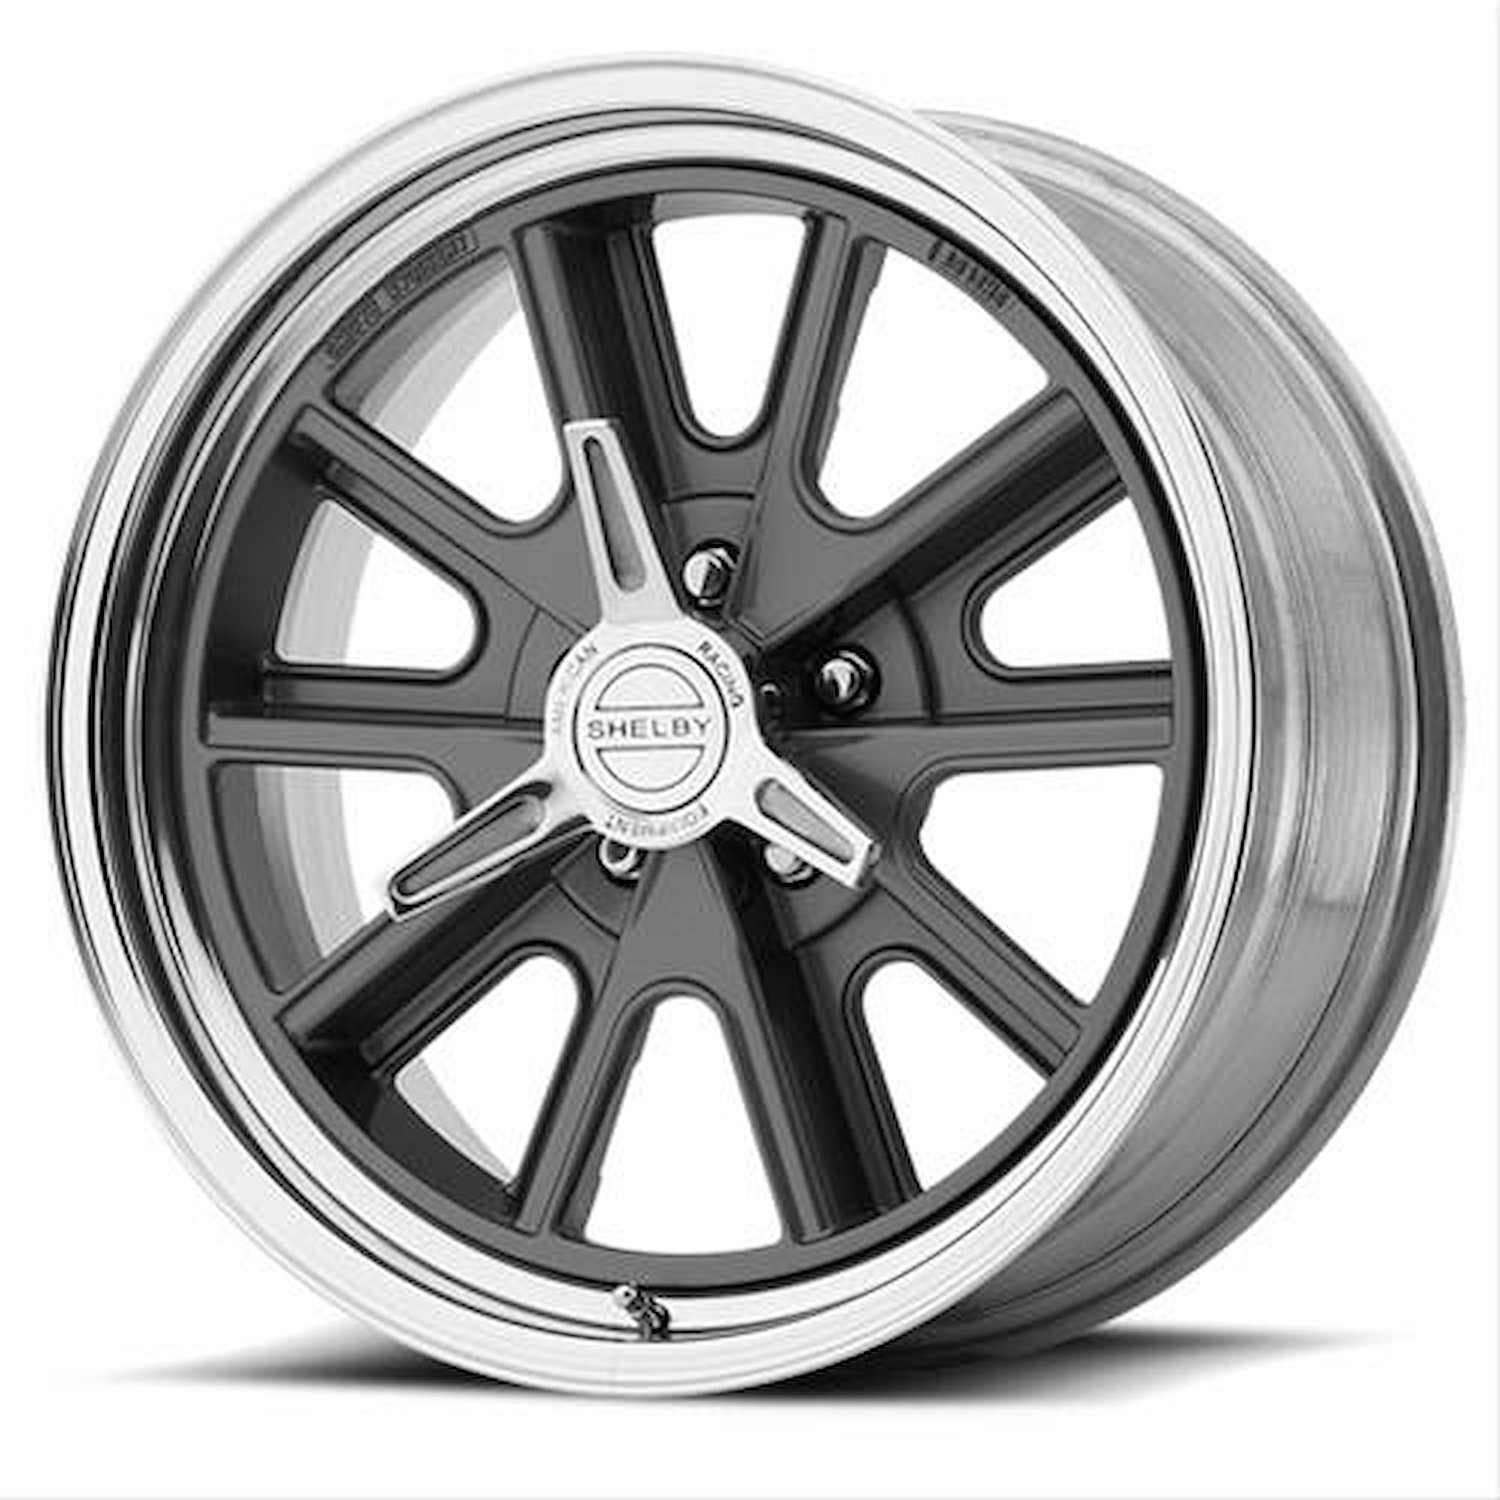 AMERICAN RACING 427 SHELBY COBRA TWO-PIECE MAG GRAY CENTER POLISHED BARREL 15 x 10 5X4.75 -19 4.75